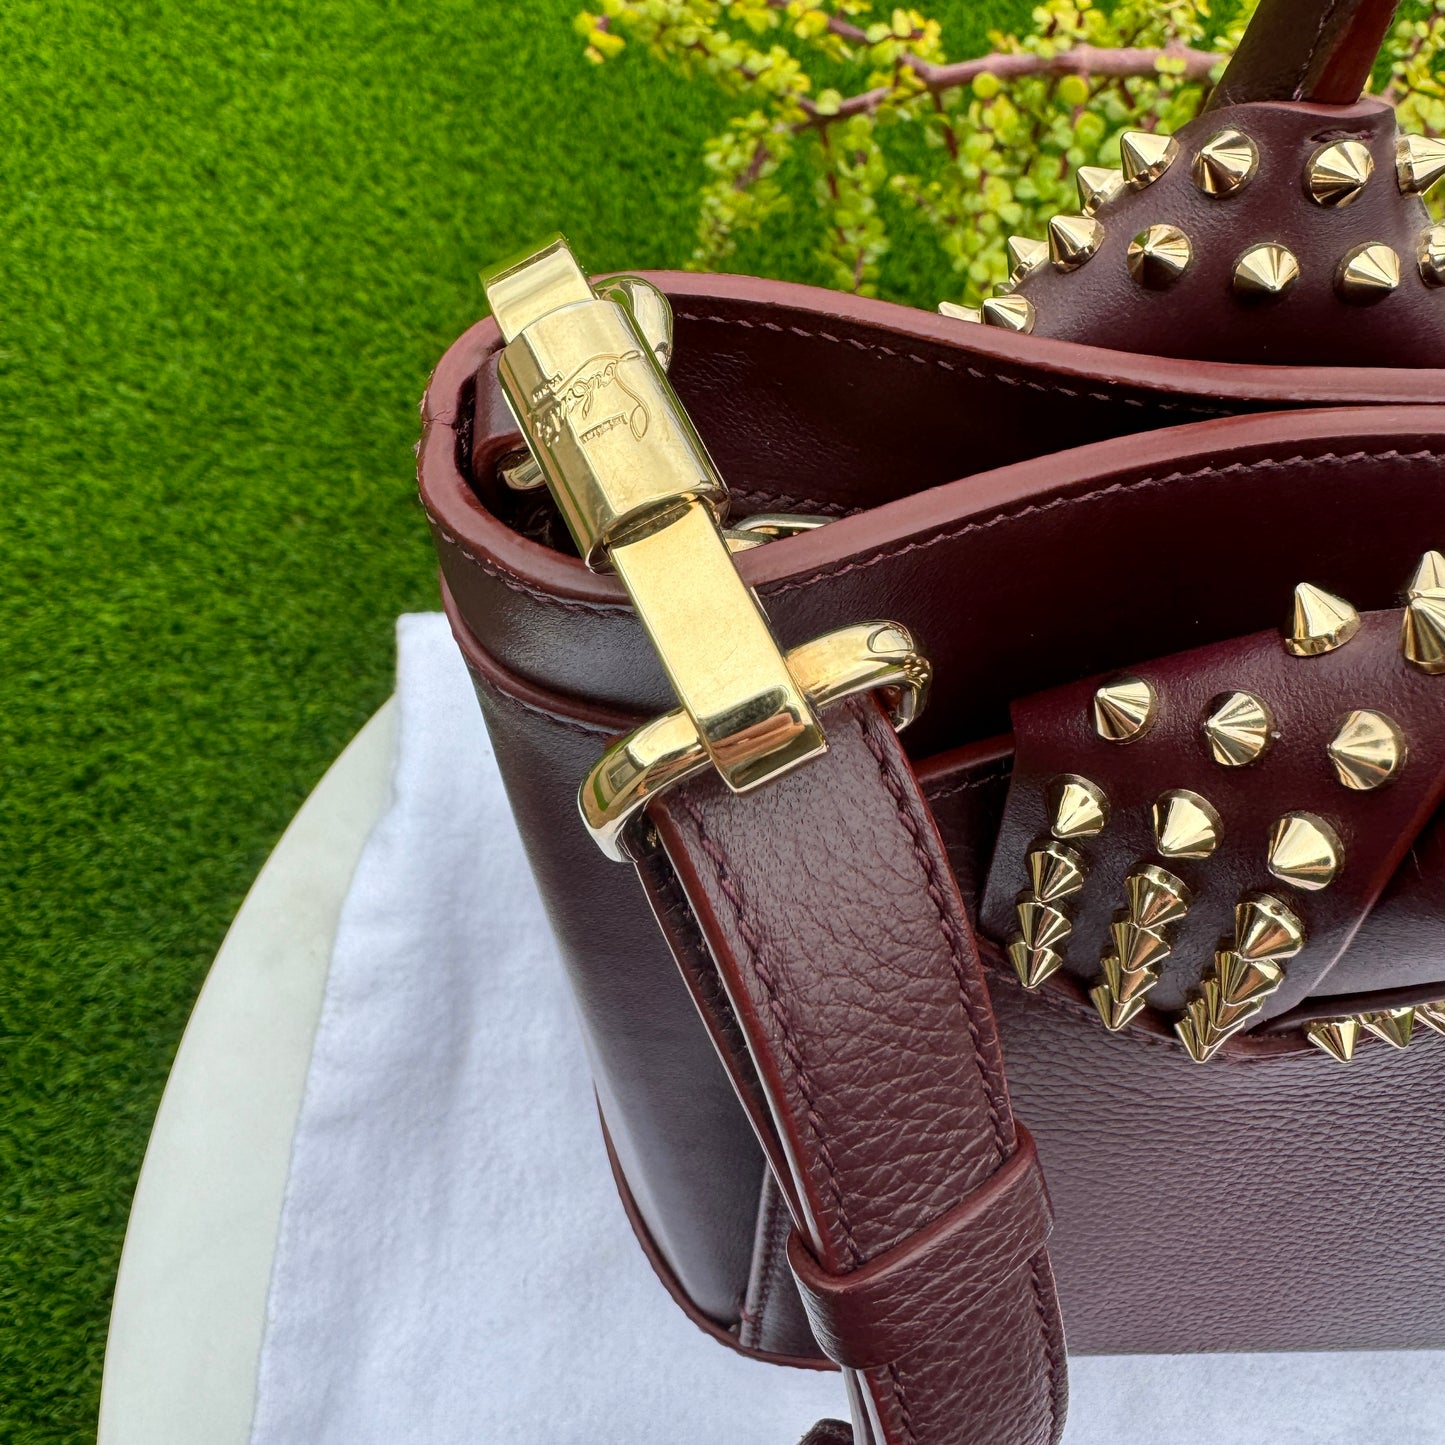 Christian Louboutin Spiked Leather Eloise Tote